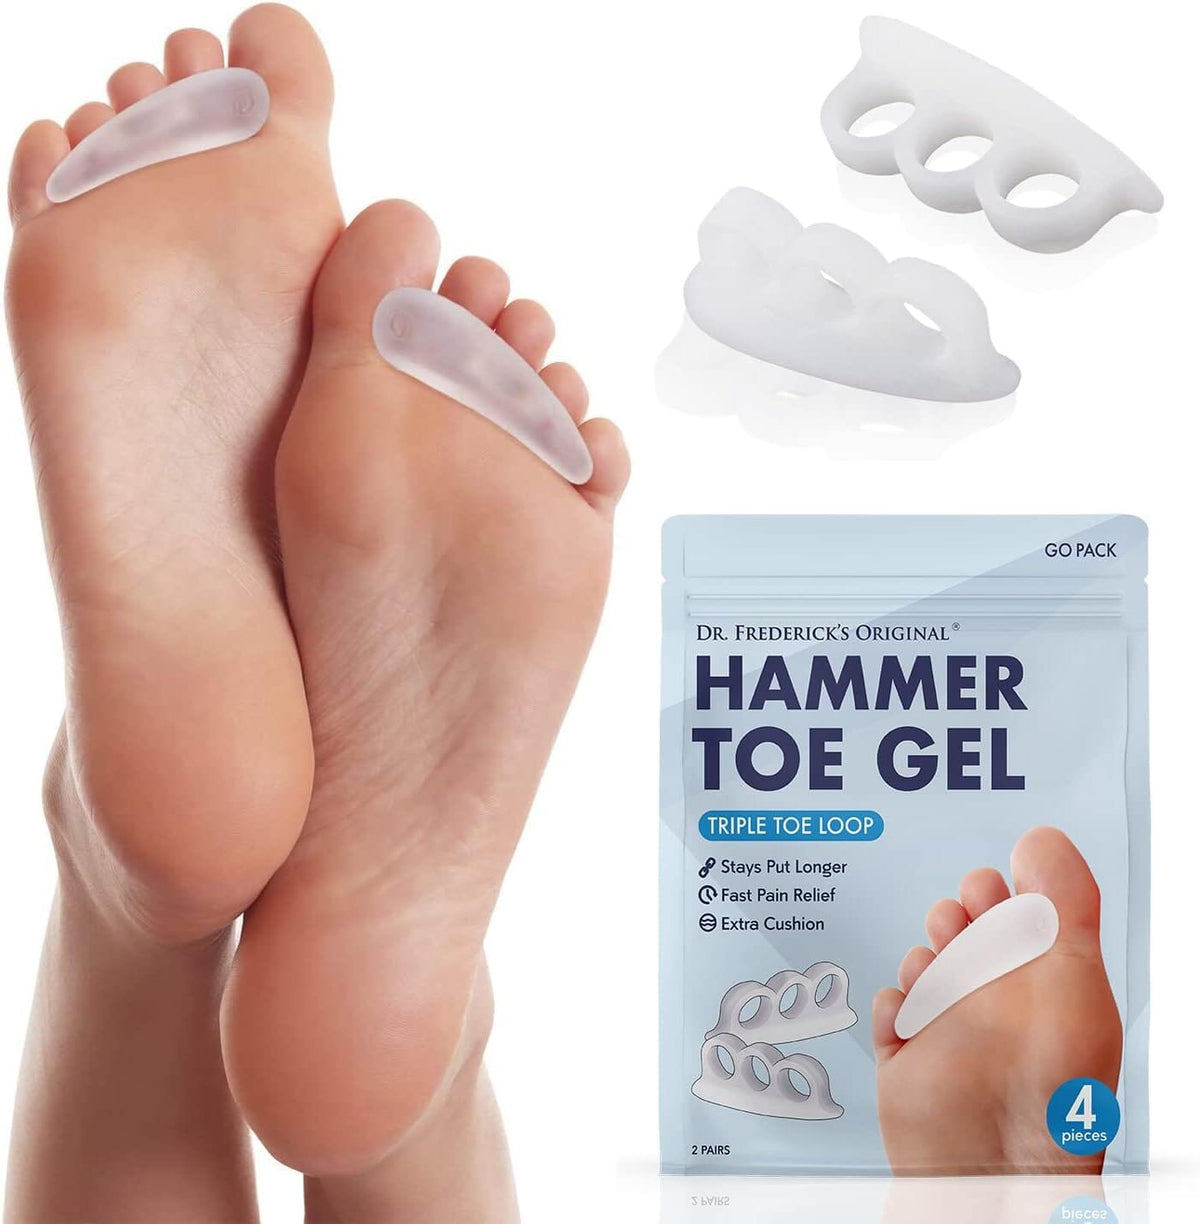 Dr. Frederick&#39;s Original Hammer Toe Gels - 4pcs - Hammer Toe Support Crest for Women &amp; Men - Joint Realign - Cushion, Support &amp; Temporary Splint - Crooked, Claw, Diabetic Toe Brace - 3 Loop Design Foot Pain Dr. Frederick&#39;s Original 